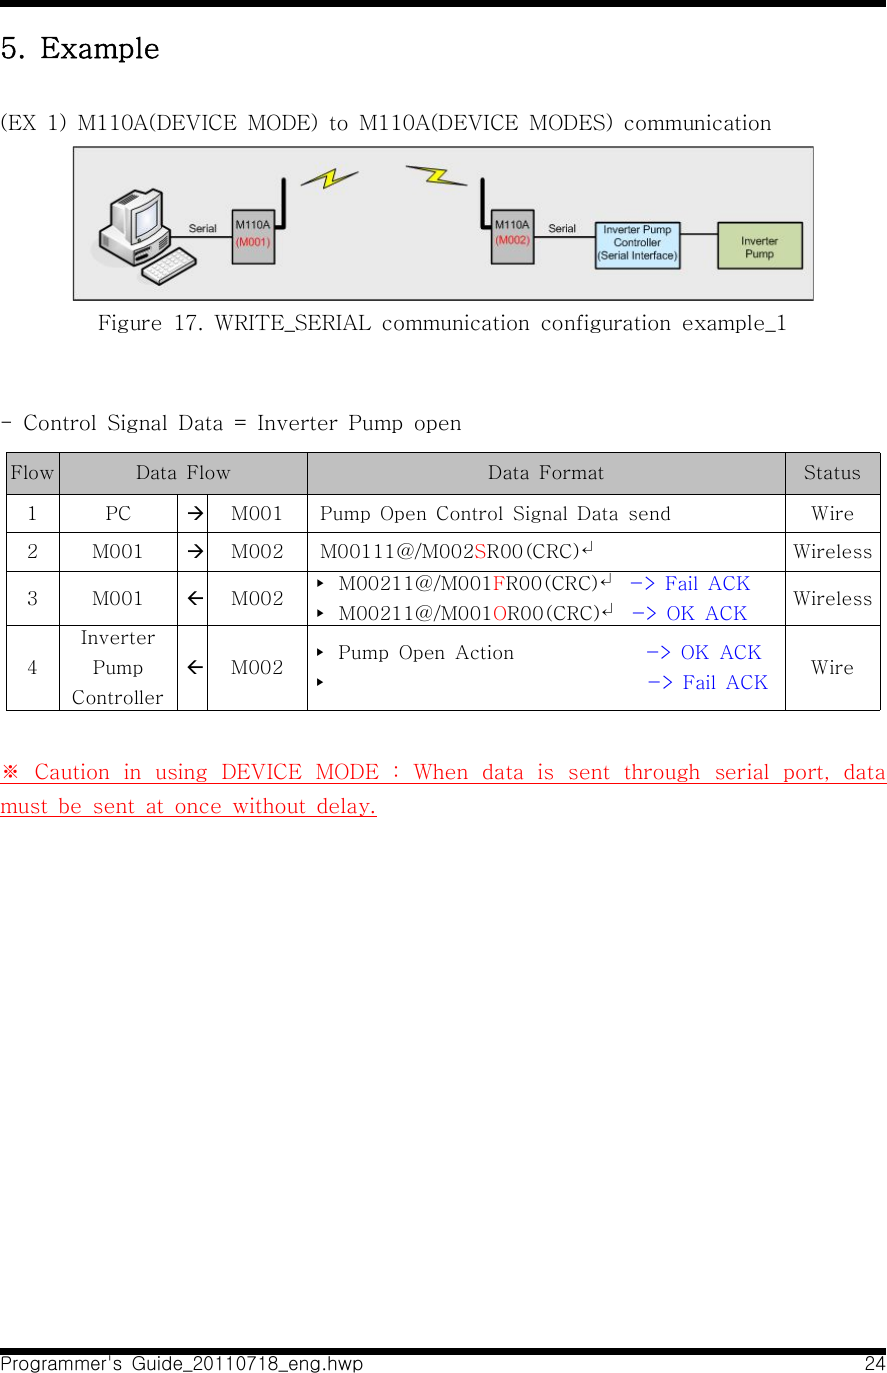 Programmer&apos;s  Guide_20110718_eng.hwp 245.  Example   (EX  1)  M110A(DEVICE  MODE)  to  M110A(DEVICE  MODES)  communication Figure  17.  WRITE_SERIAL  communication  configuration  example_1-  Control  Signal  Data  =  Inverter  Pump  open Flow Data  Flow Data  Format Status1 PC àM001   Pump  Open  Control  Signal  Data  send Wire2 M001 àM002   M00111@/M002SR00(CRC)↵Wireless3 M001 ßM002 ▸  M00211@/M001FR00(CRC)↵  -&gt;  Fail  ACK▸  M00211@/M001OR00(CRC)↵  -&gt;  OK  ACK Wireless4Inverter Pump ControllerßM002 ▸  Pump  Open  Action                            -&gt;  OK  ACK ▸                                  -&gt;  Fail  ACK Wire※  Caution  in  using  DEVICE  MODE  :  When  data  is  sent  through  serial  port,  data must  be  sent  at  once  without  delay.